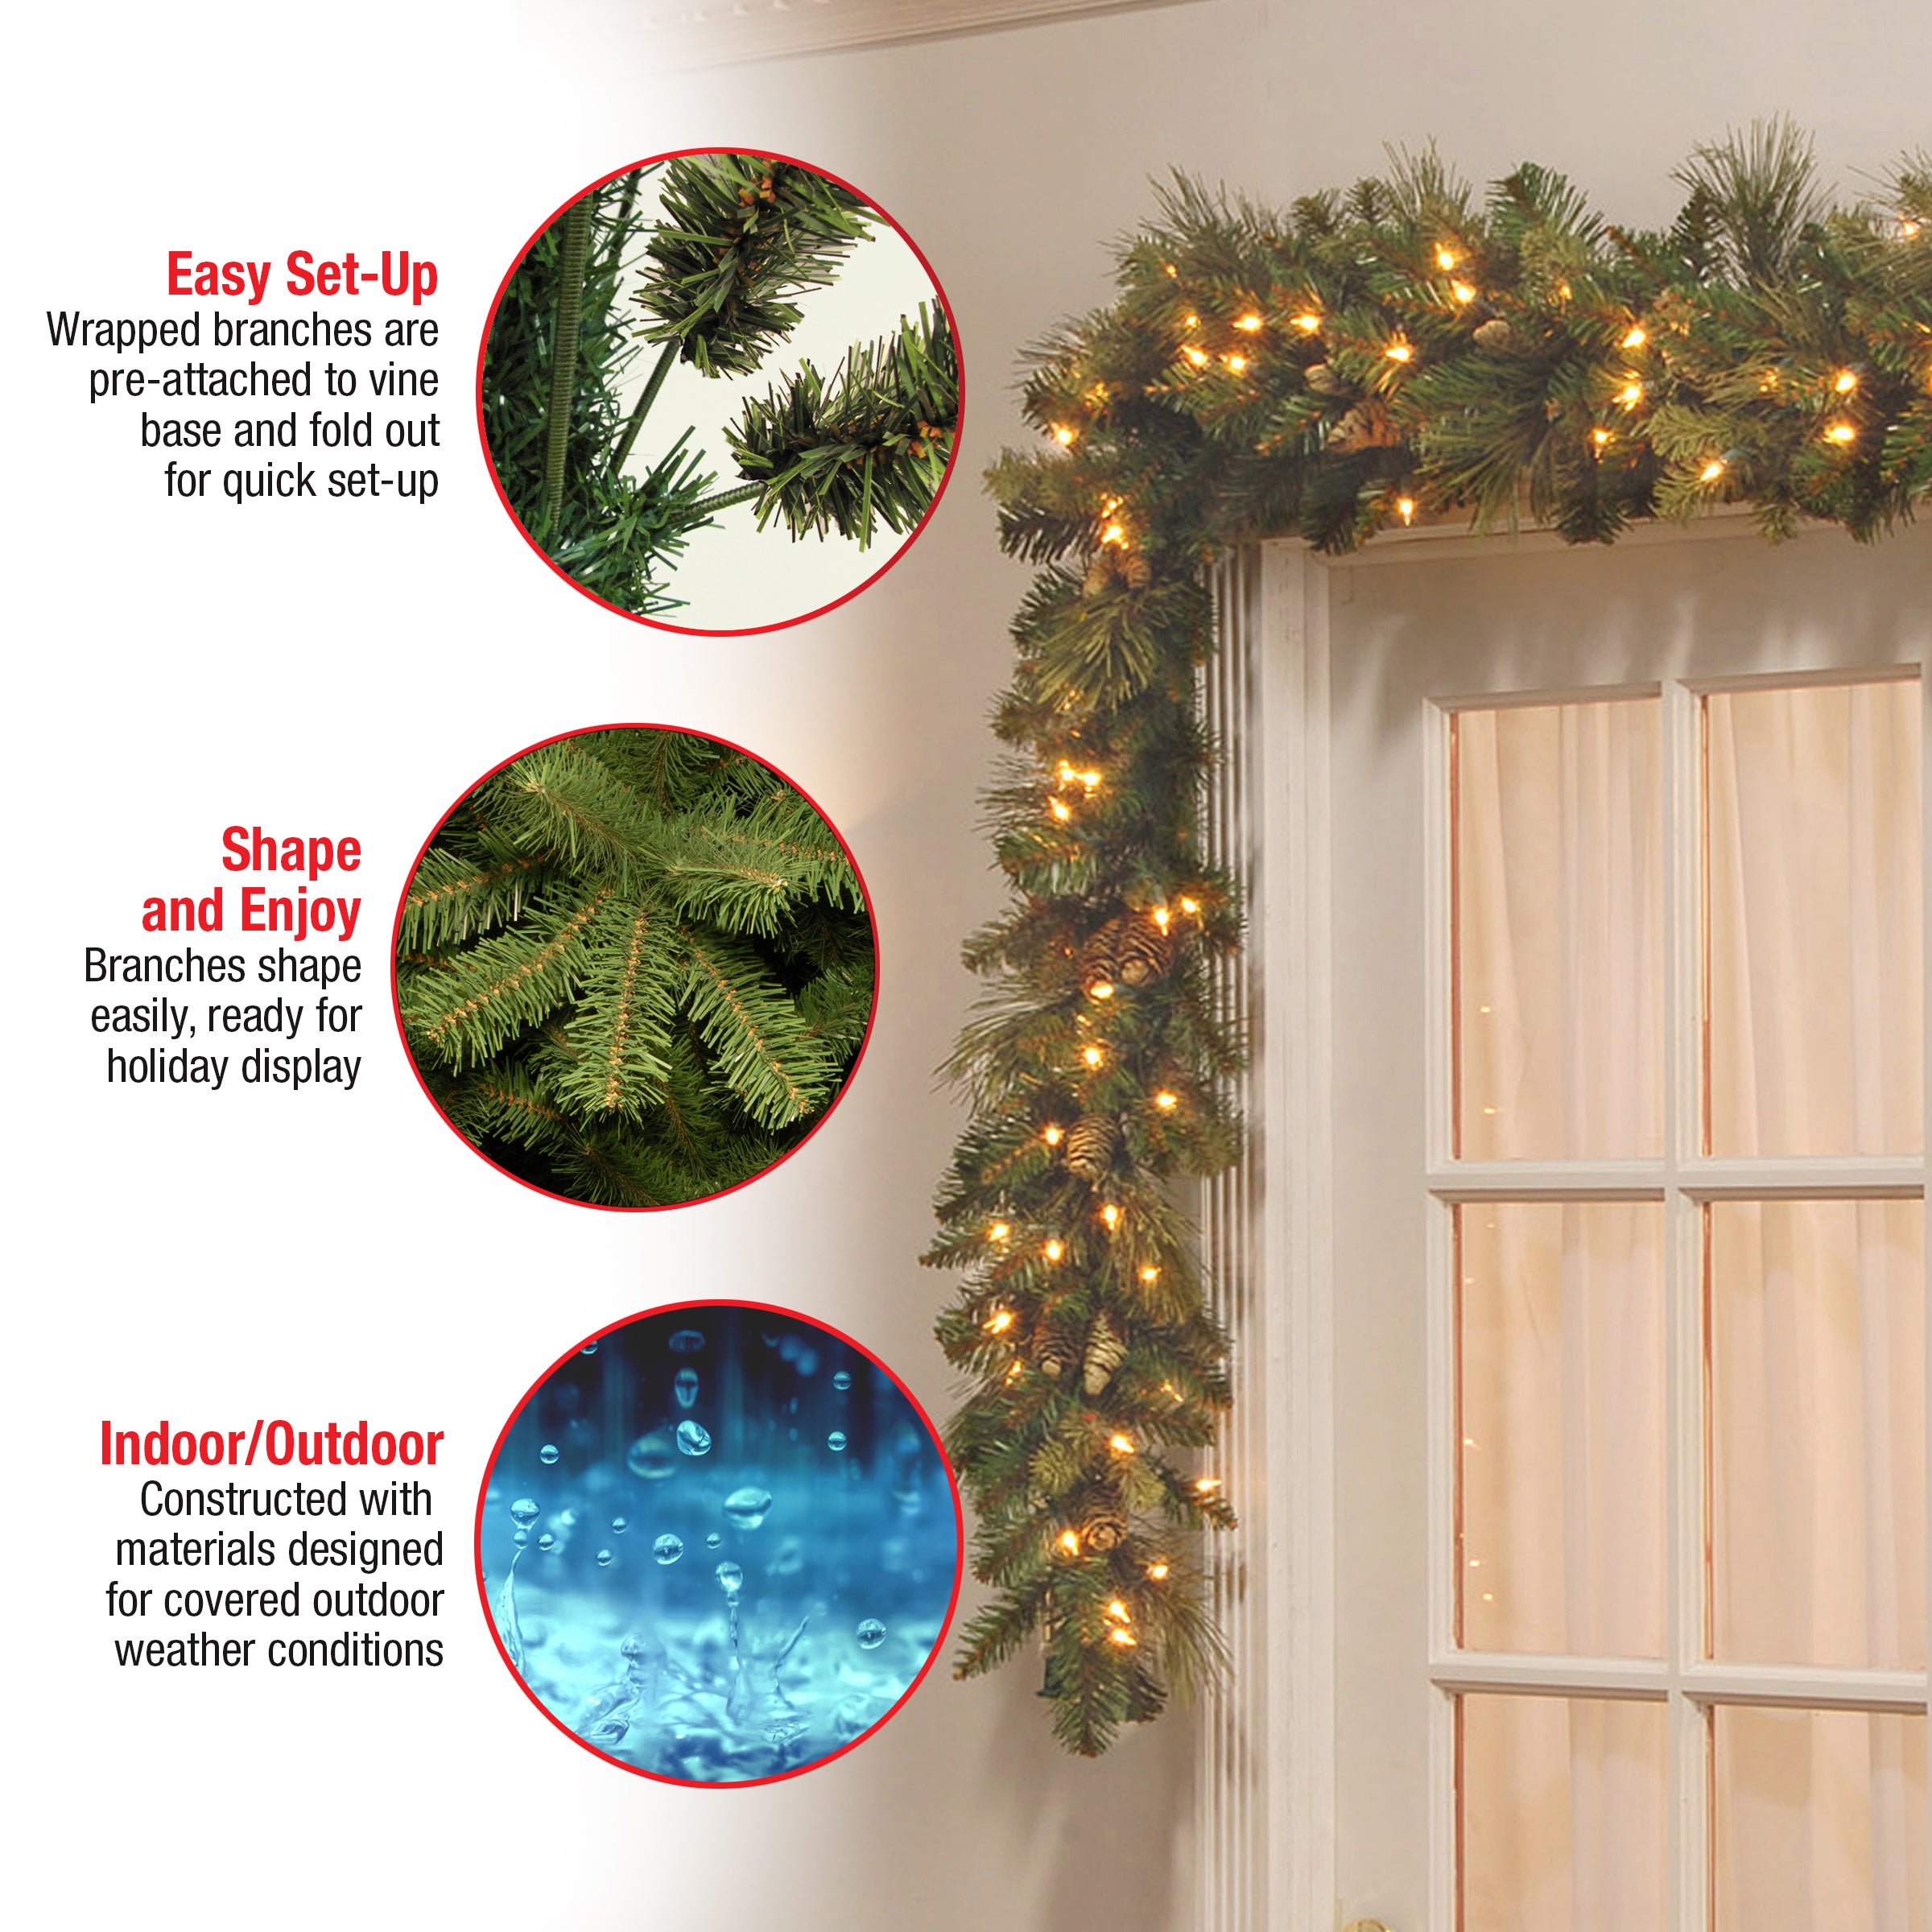 Pre-Lit Artificial Christmas Garland, Green, Carolina Pine, White Lights, Decorated with Pine Cones, Plug In, Christmas Collection, 9 Feet